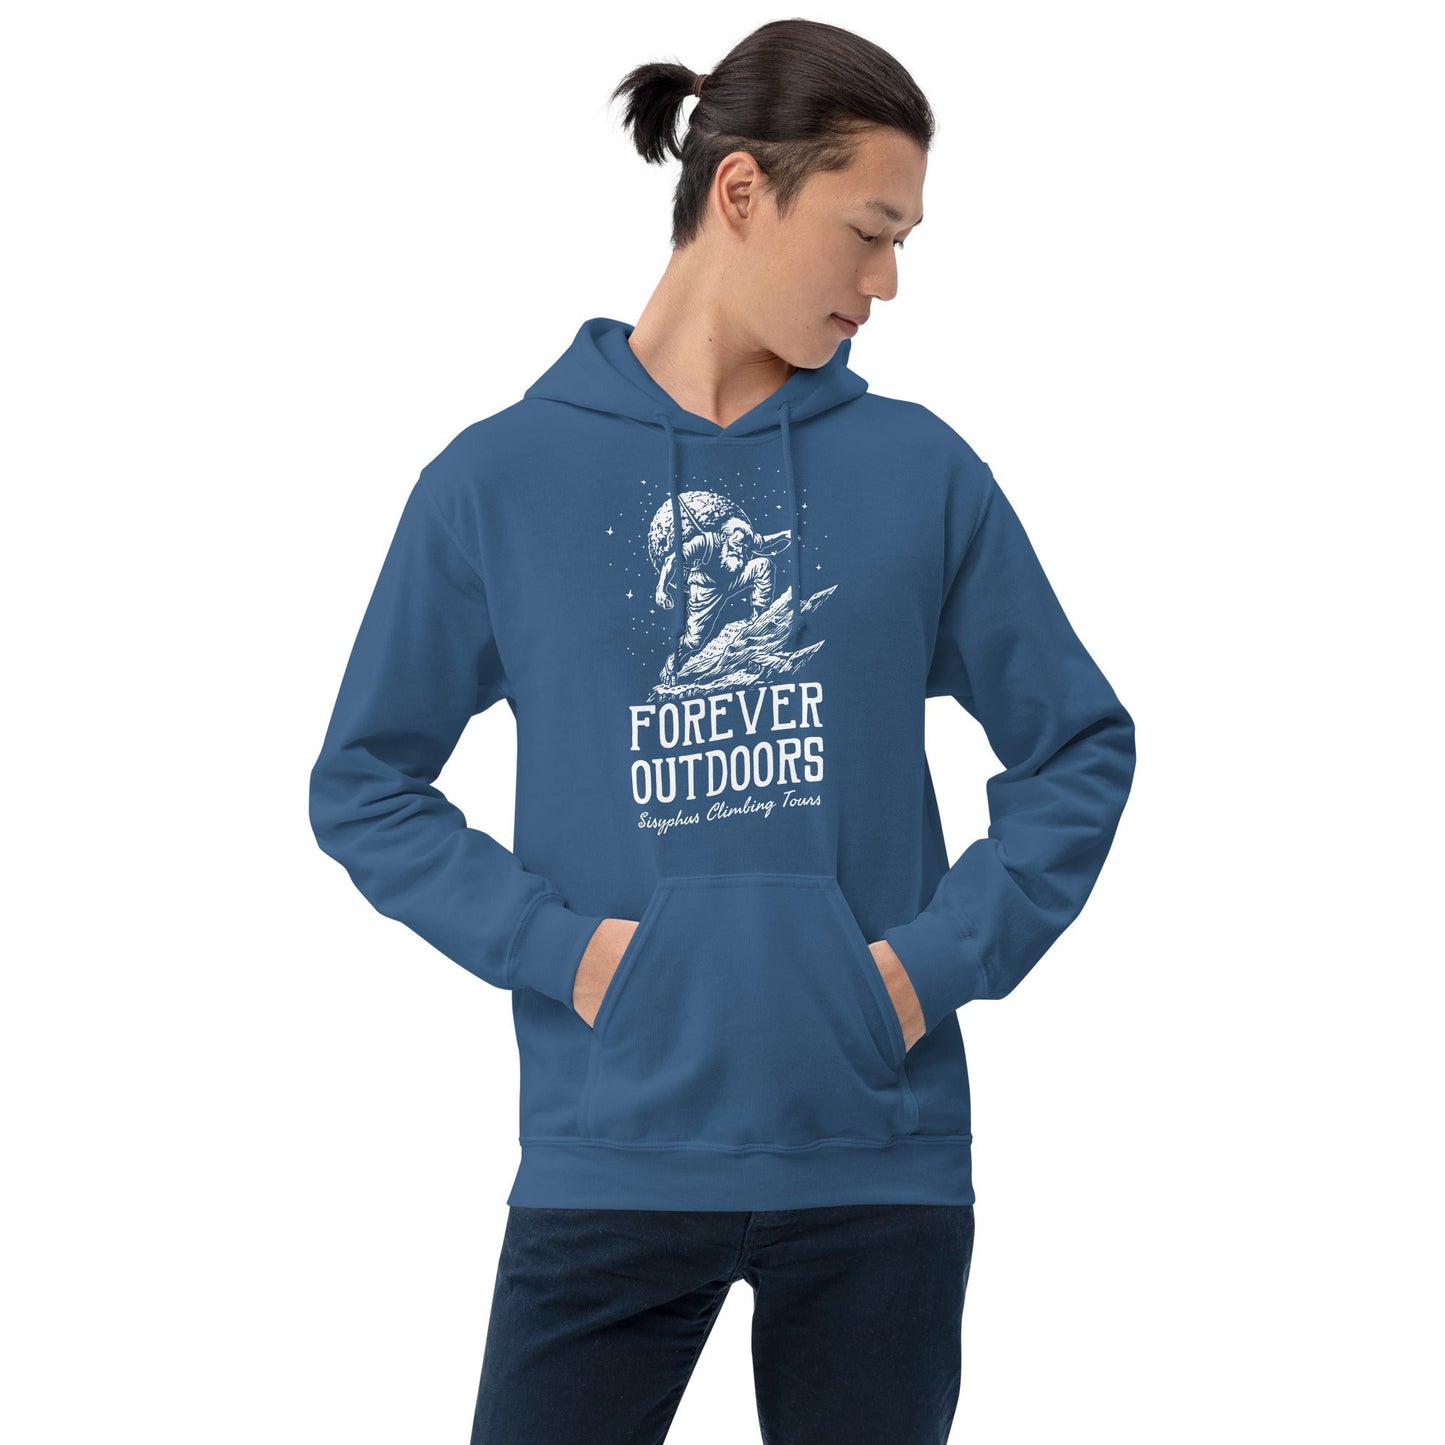 Forever Outdoors - Sisyphus Climbing Tours - Hoodie